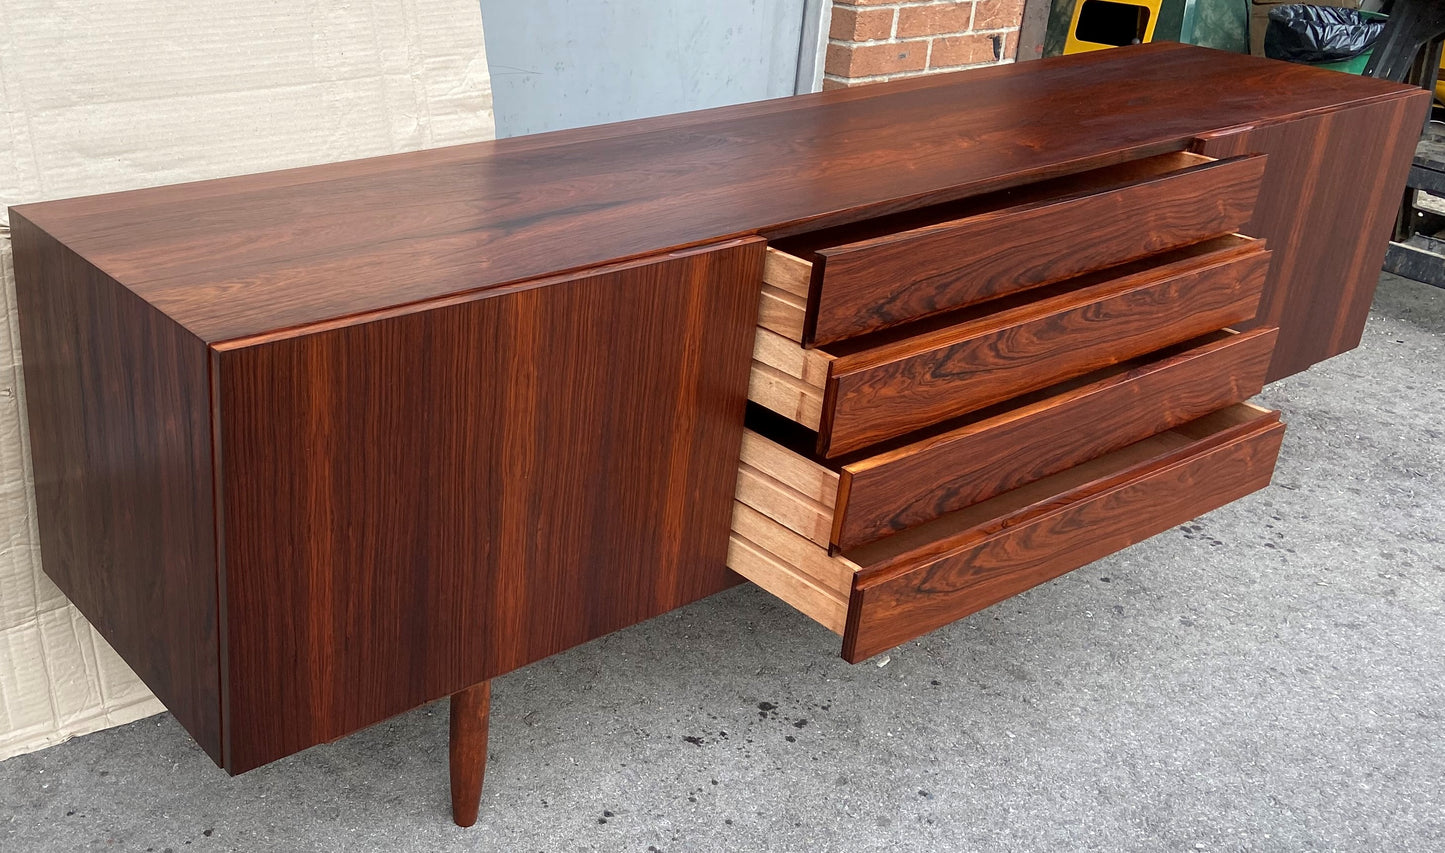 REFINISHED Danish Mid Century Modern Rosewood Credenza 90.5" Perfect